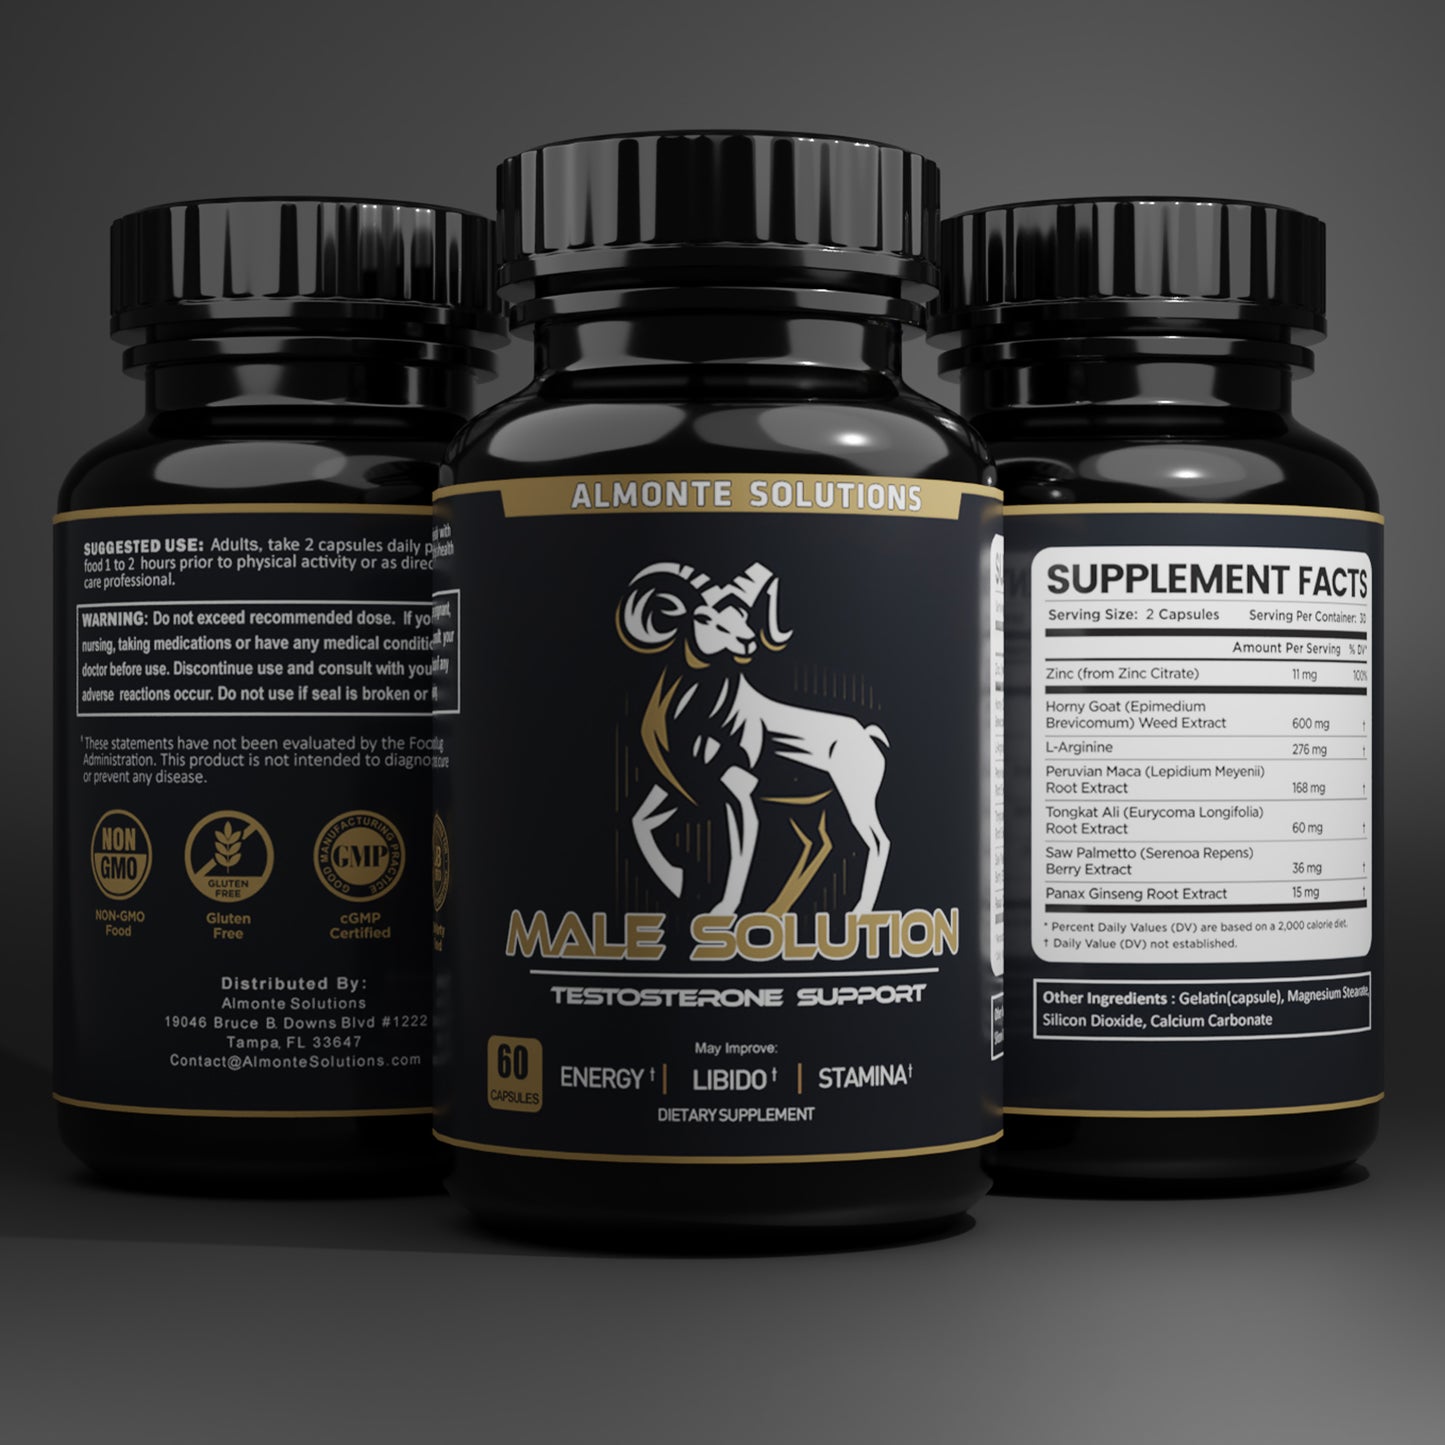 Male Solution - Men's Testosterone Support